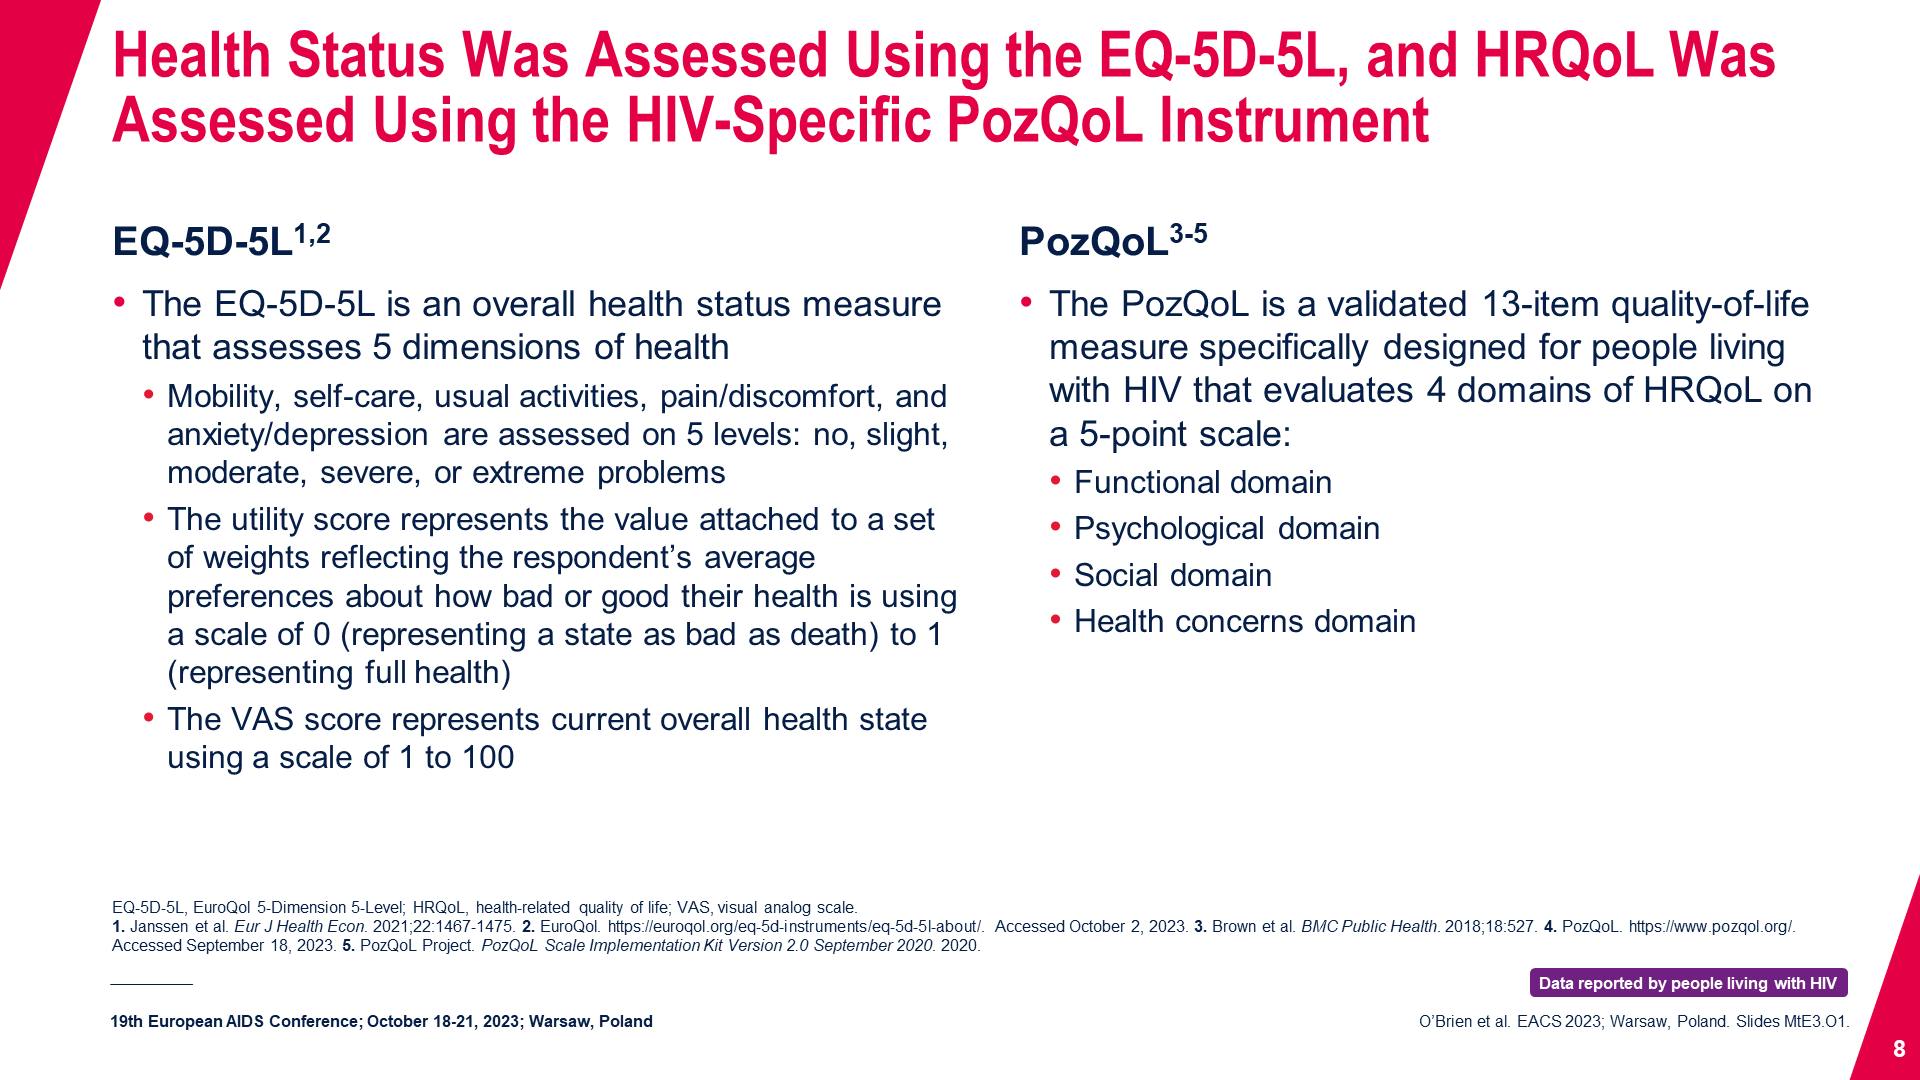 Health Status Was Assessed Using the EQ-5D-5L, and HRQoL Was Assessed Using the HIV-Specific PozQoL Instrument